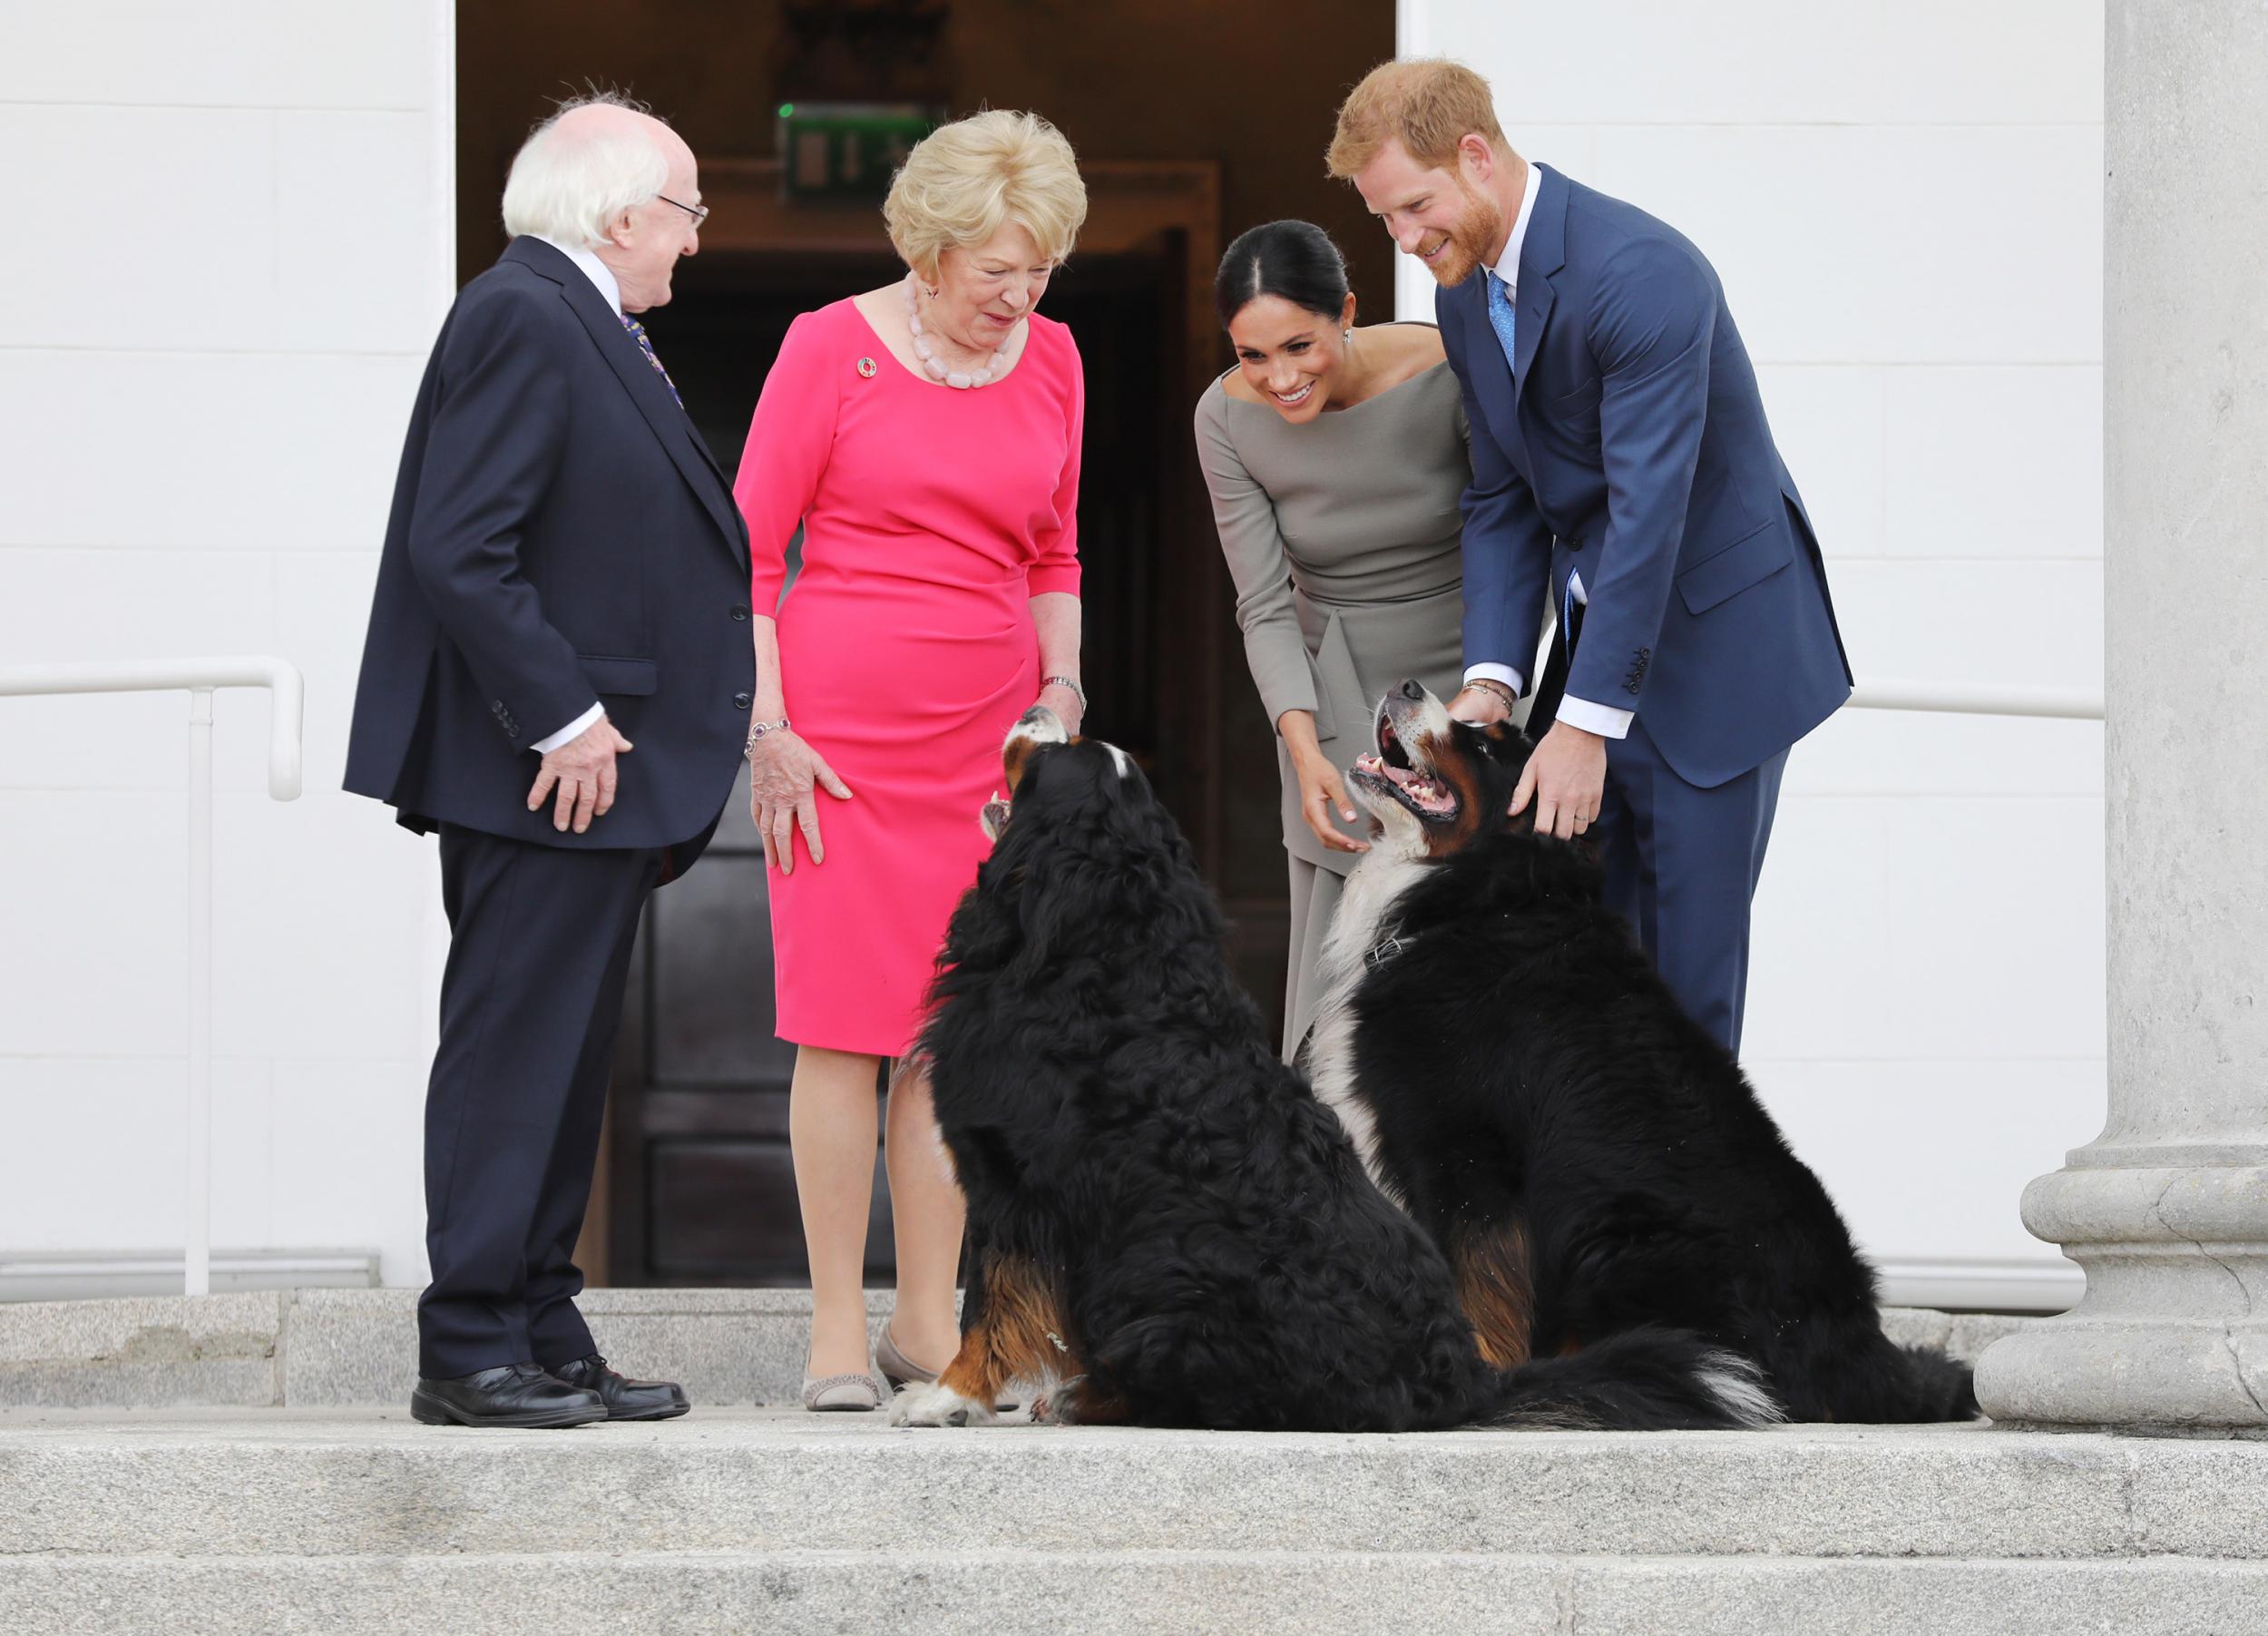 Prince Harry and Meghan Markle meet President Higgins' dogs Bród and Síoda during an official visit to Dublin